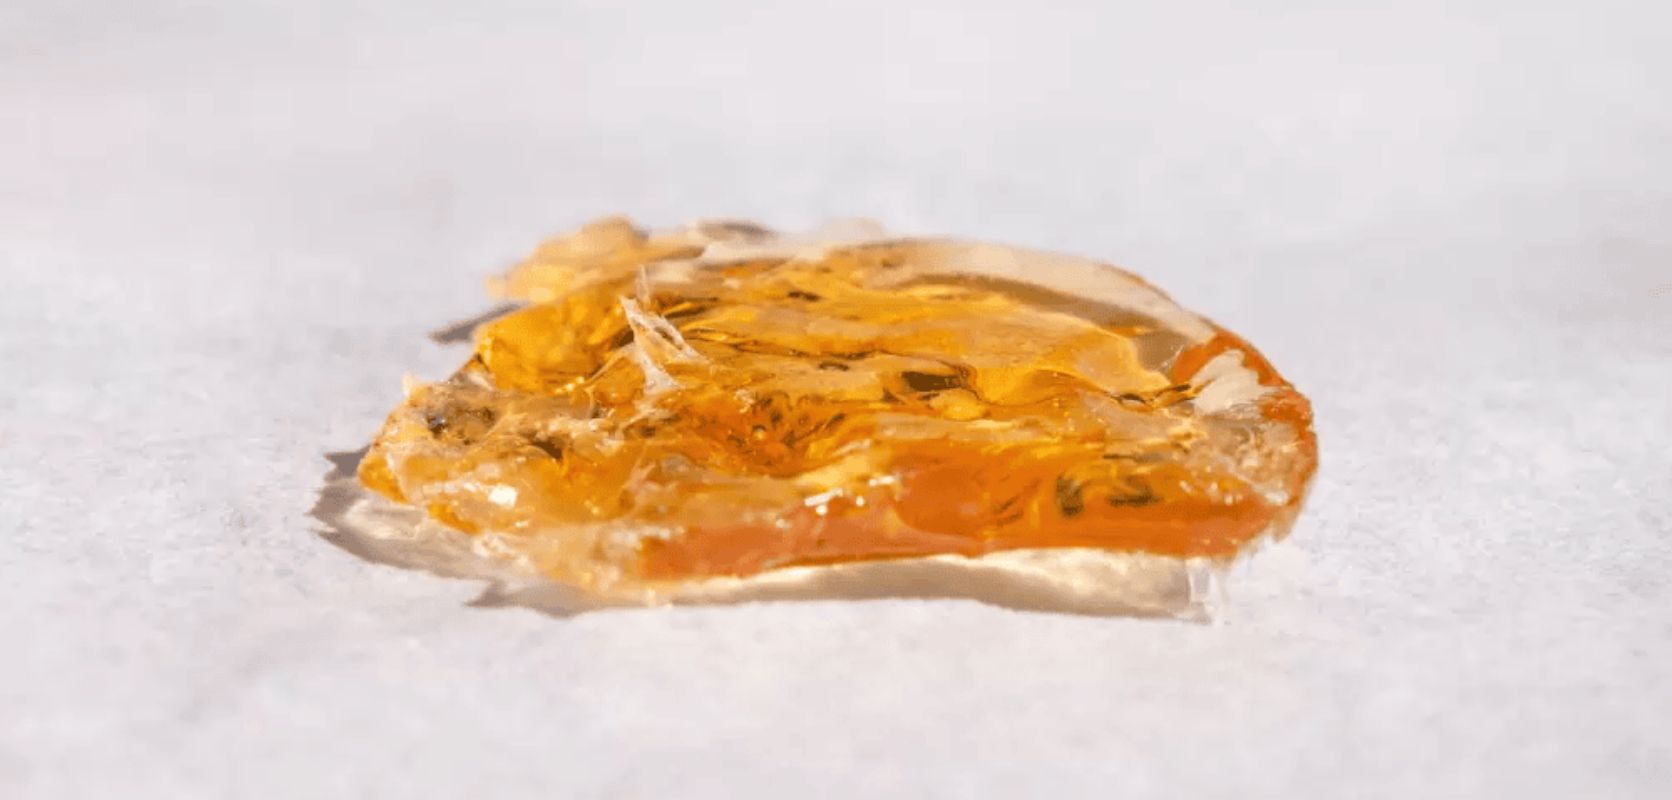 You can buy rosin in a cannabis dispensary or make it at home. To make rosin at home, there are a few things you need to have at your disposal. 